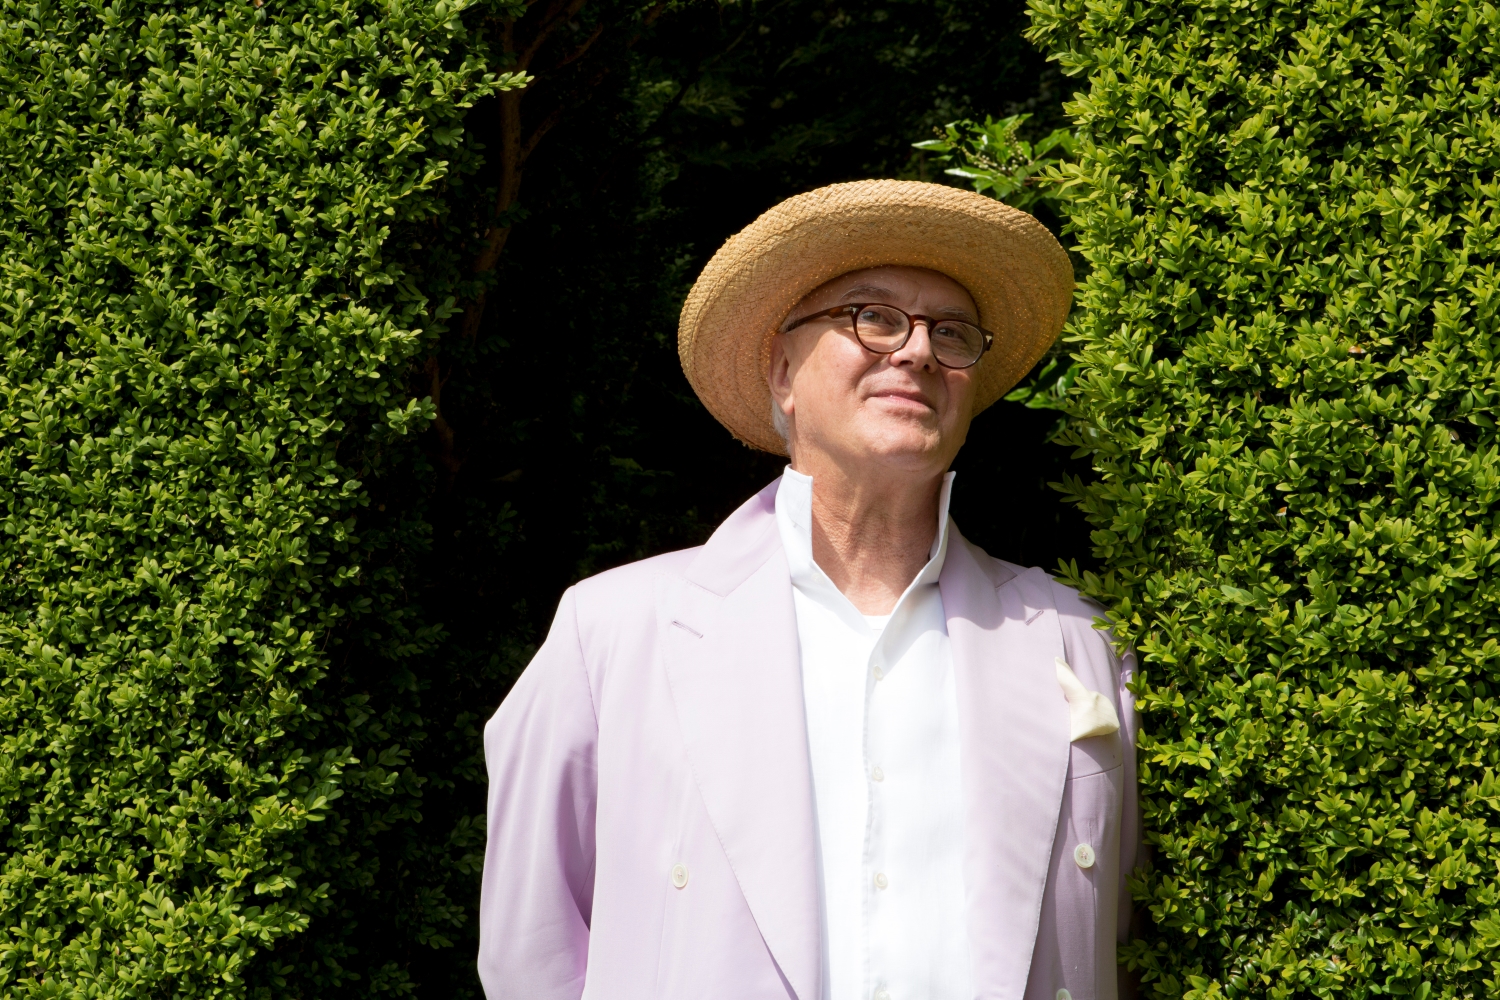 Manolo Blahnik in a garden staring fondly at the nature surrounding him